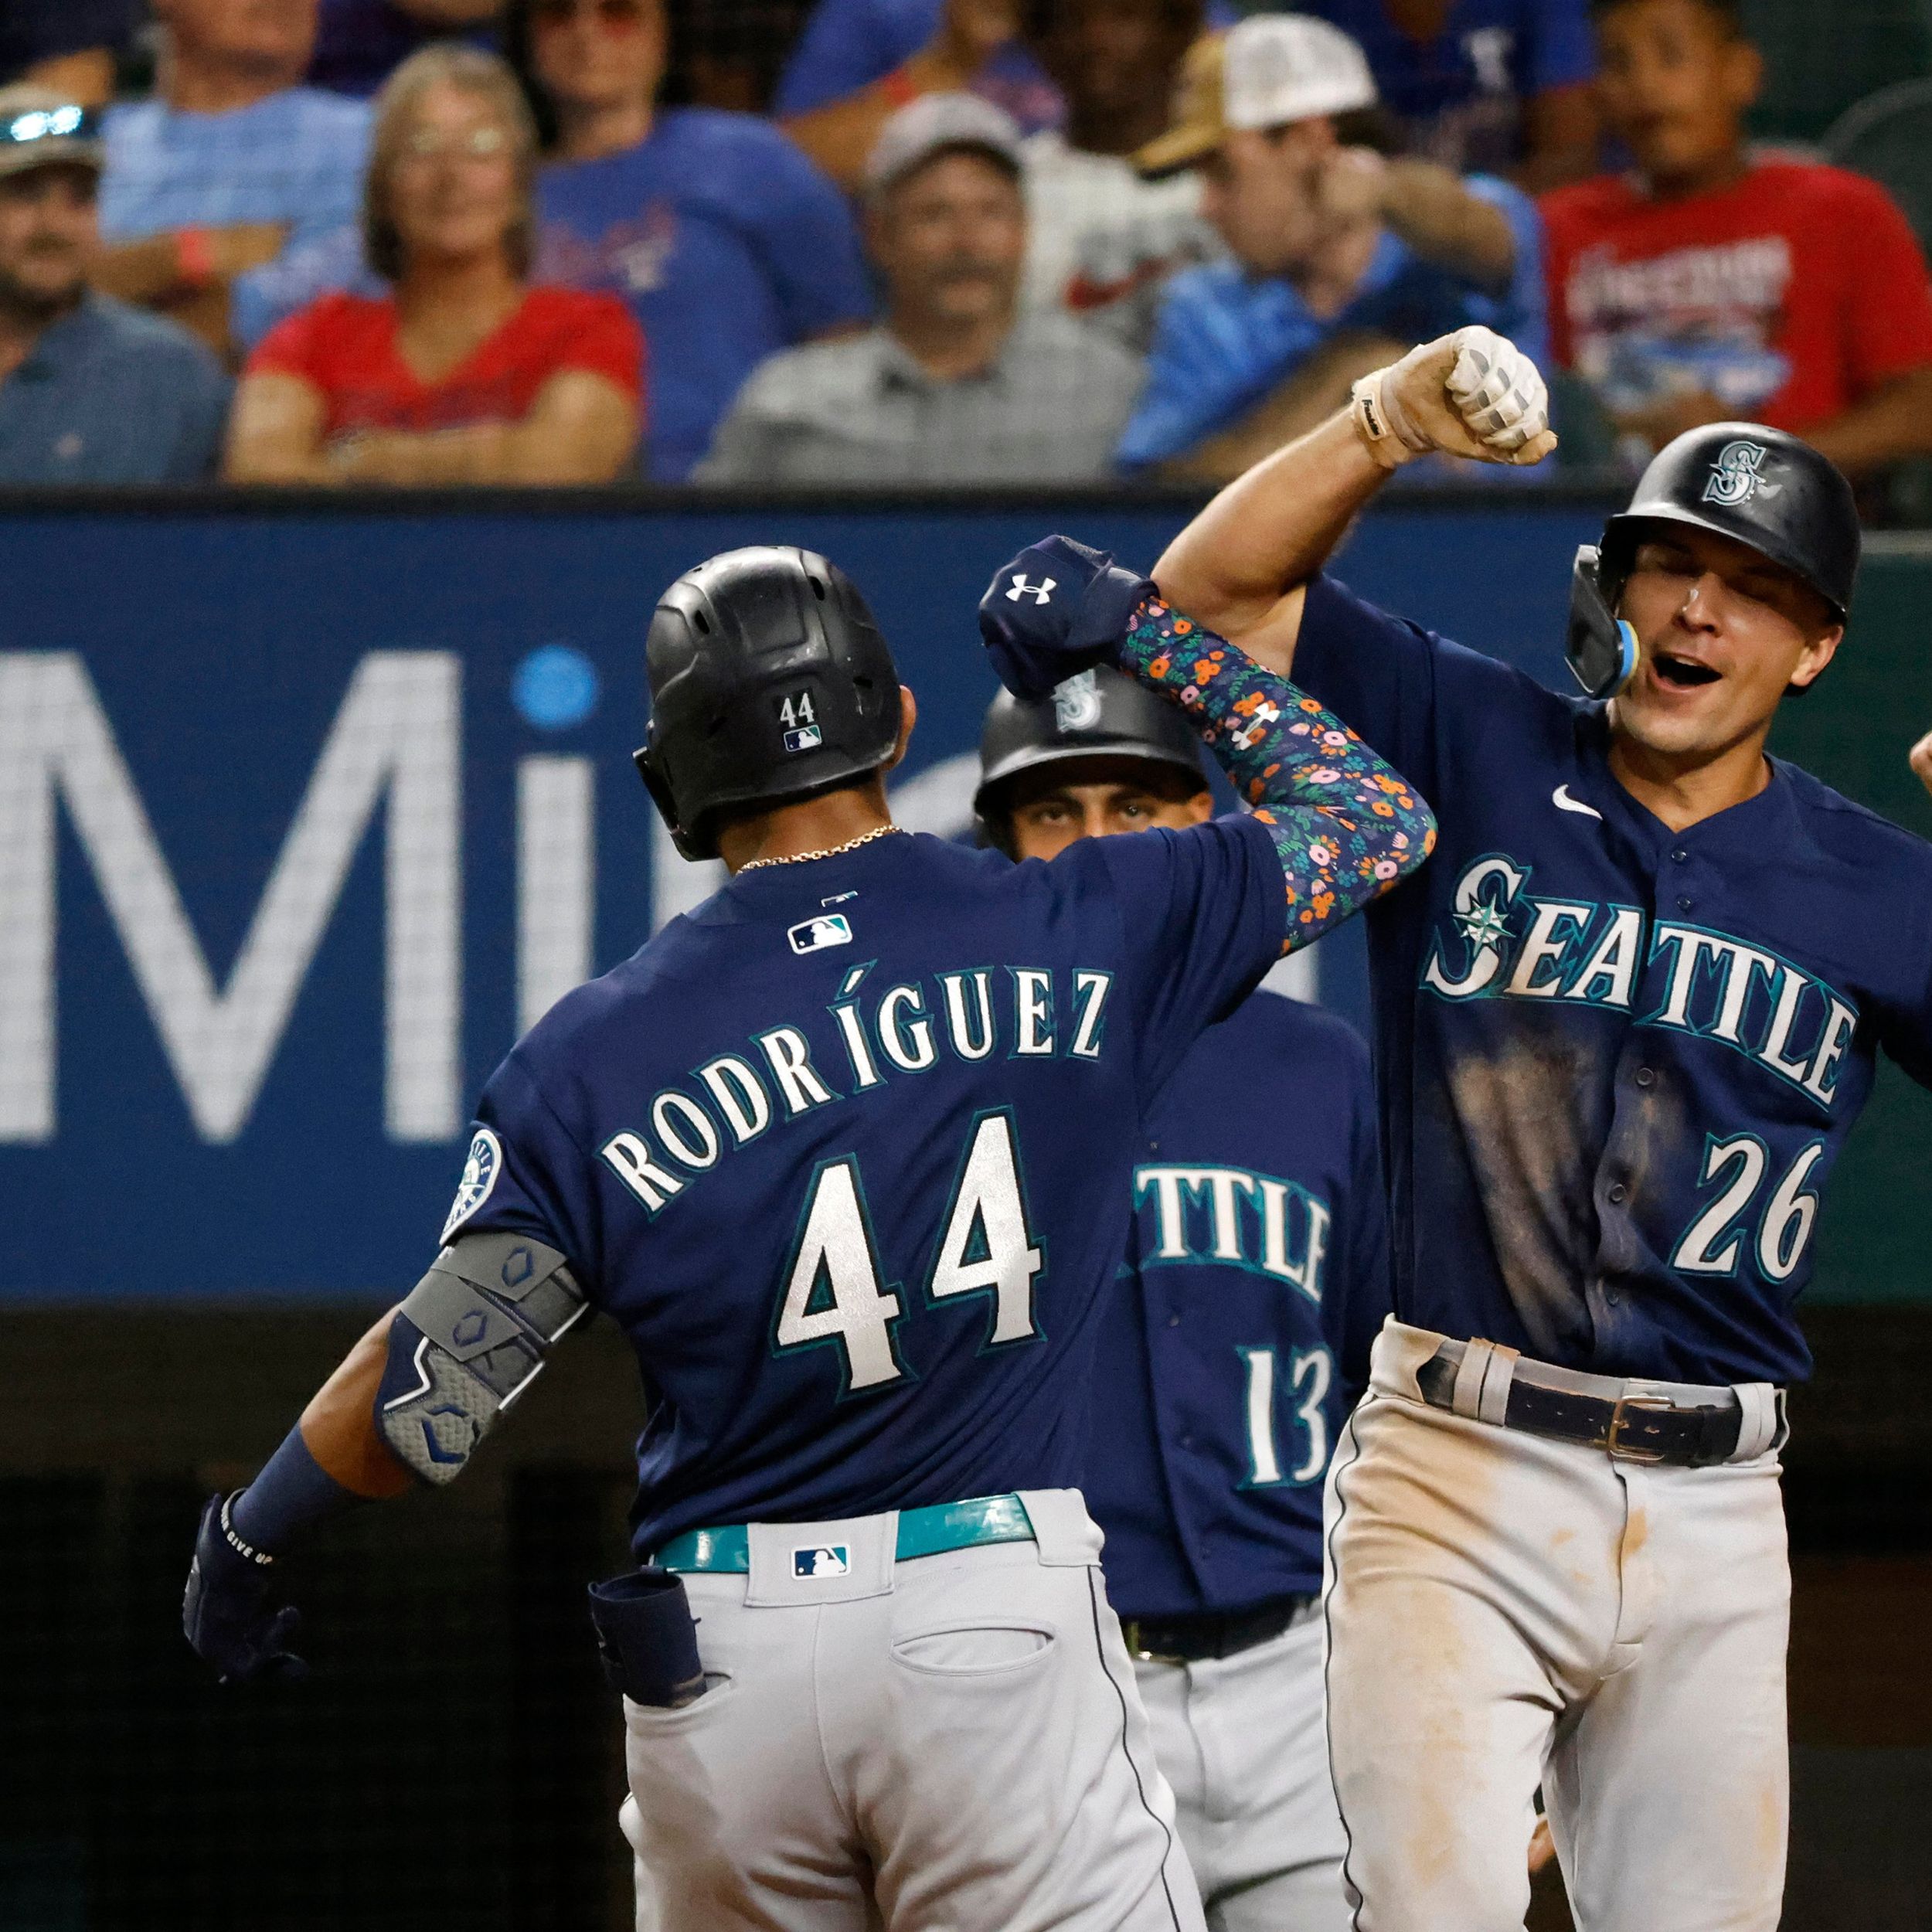 Don't sleep on how good Adam Frazier can be for the Mariners